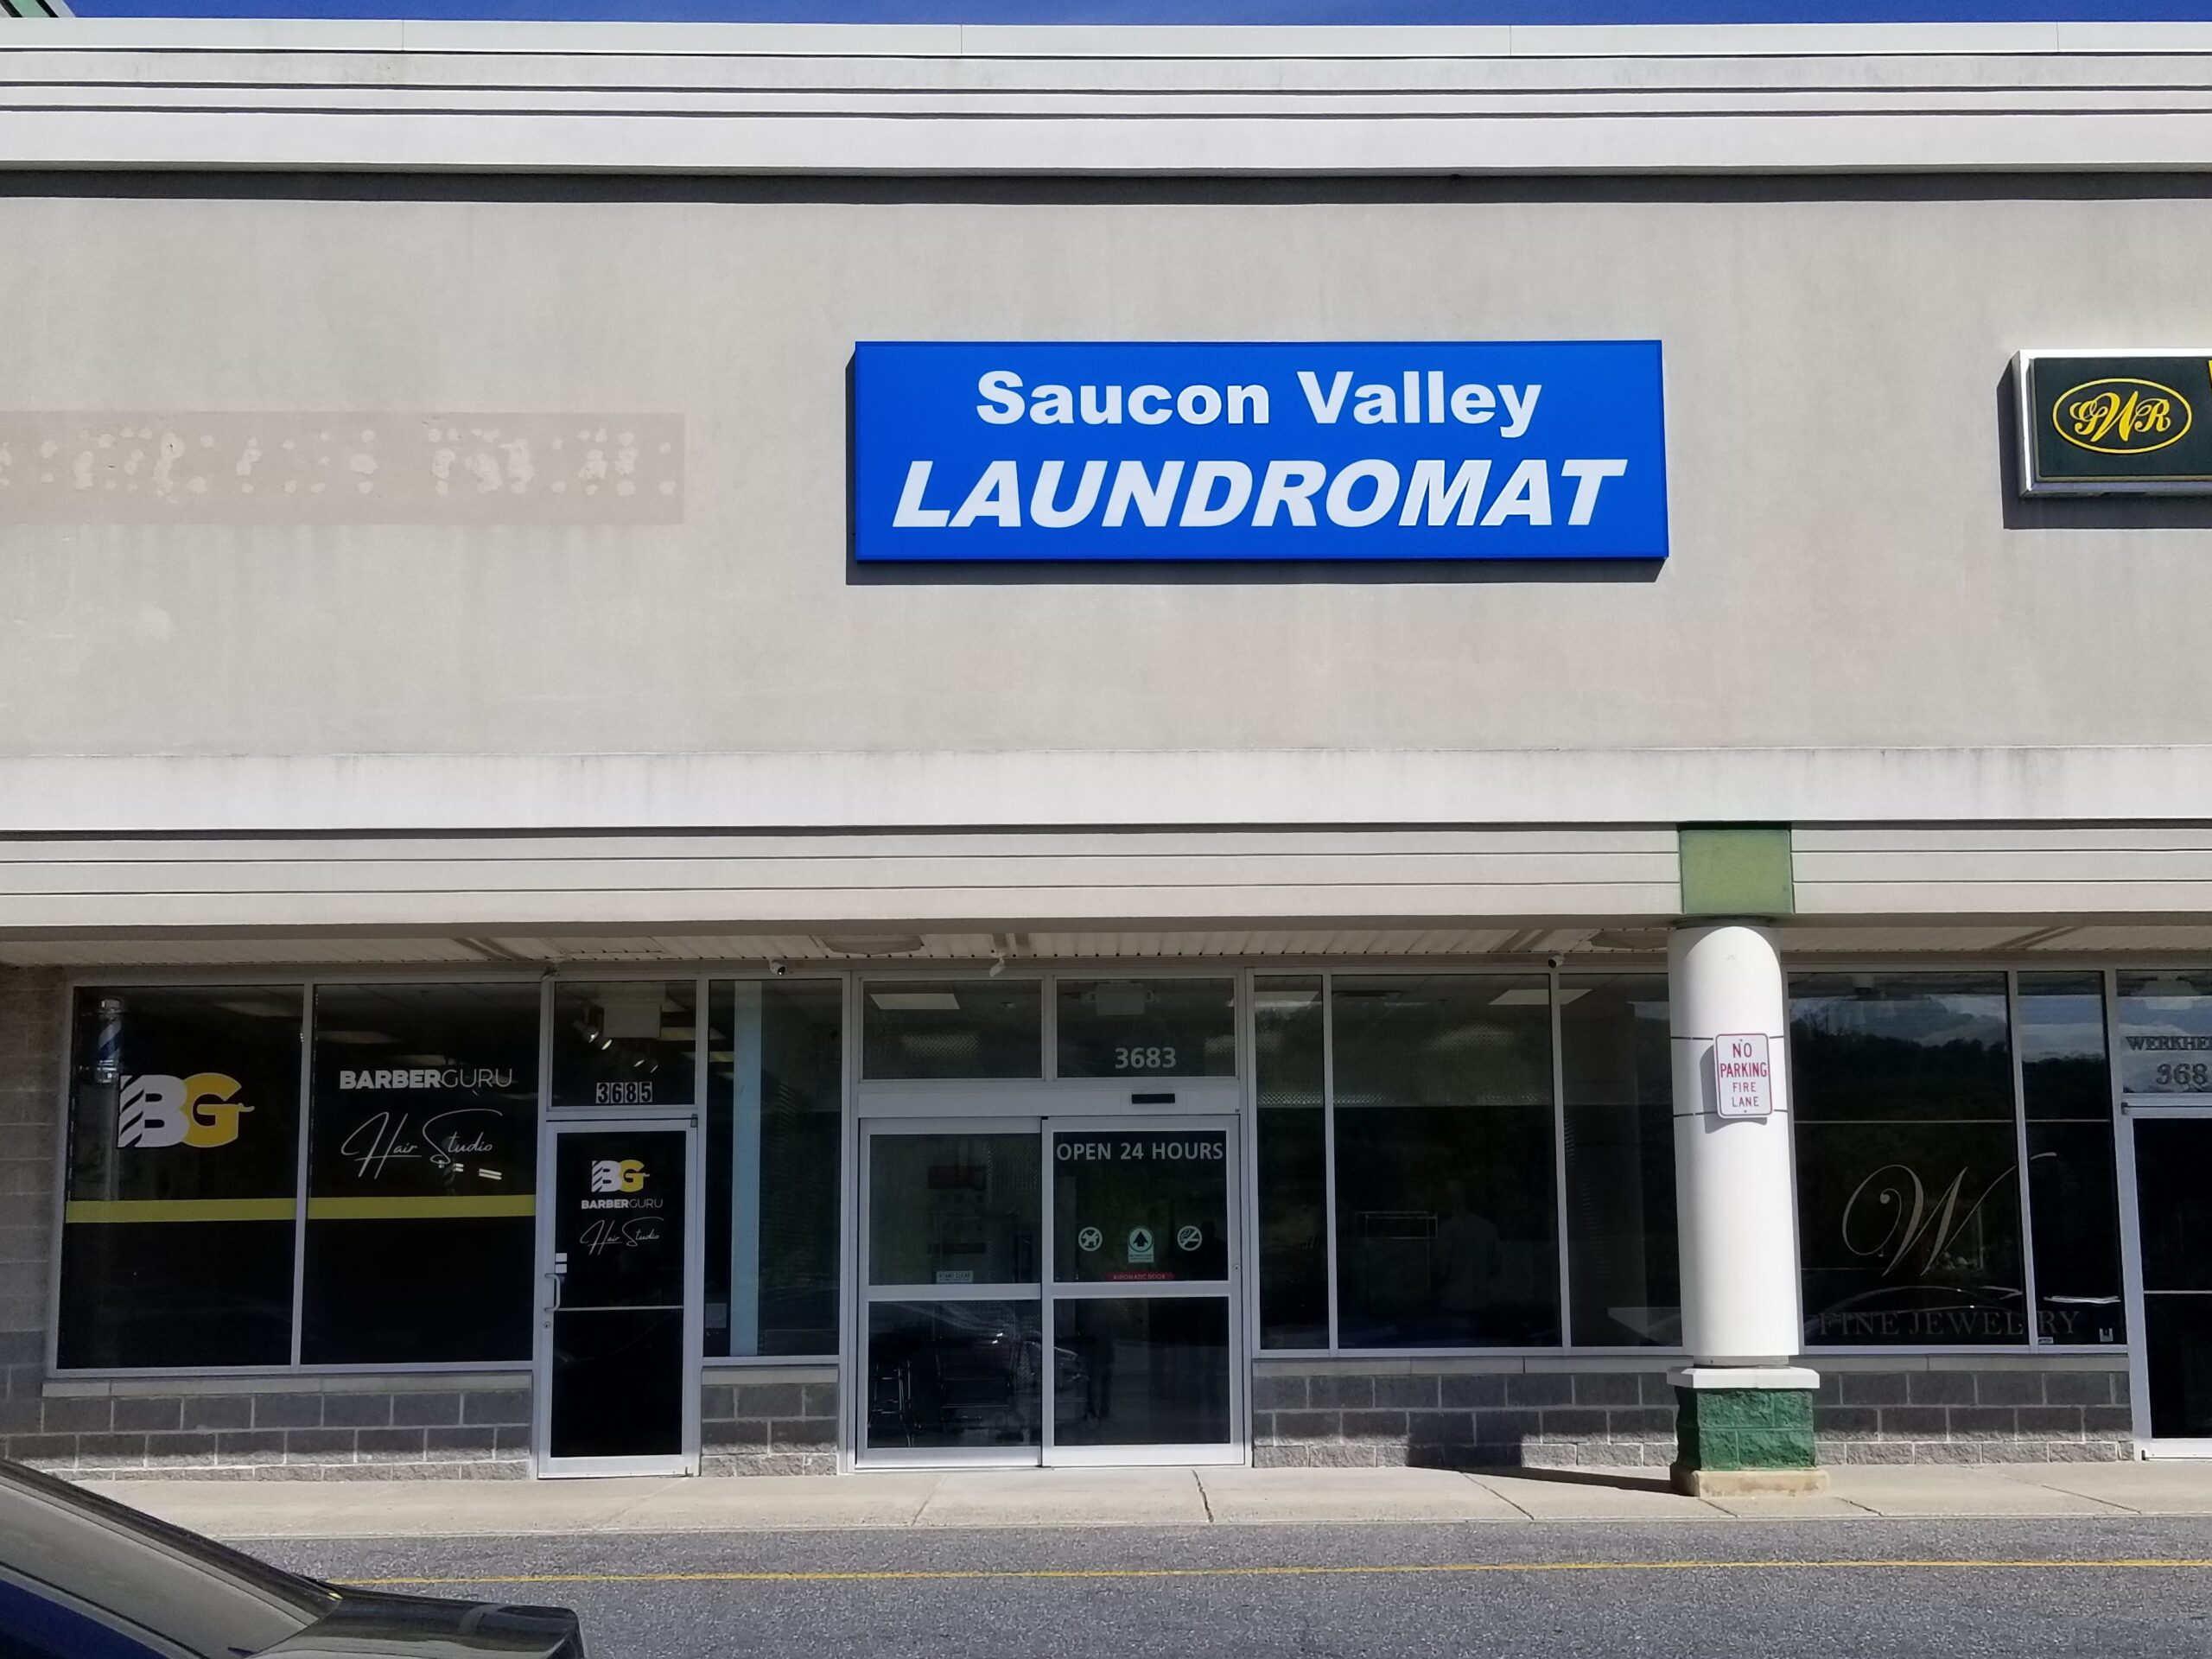 Damariscotta Laundromat Gets New Owners, Upgrades - The Lincoln County News